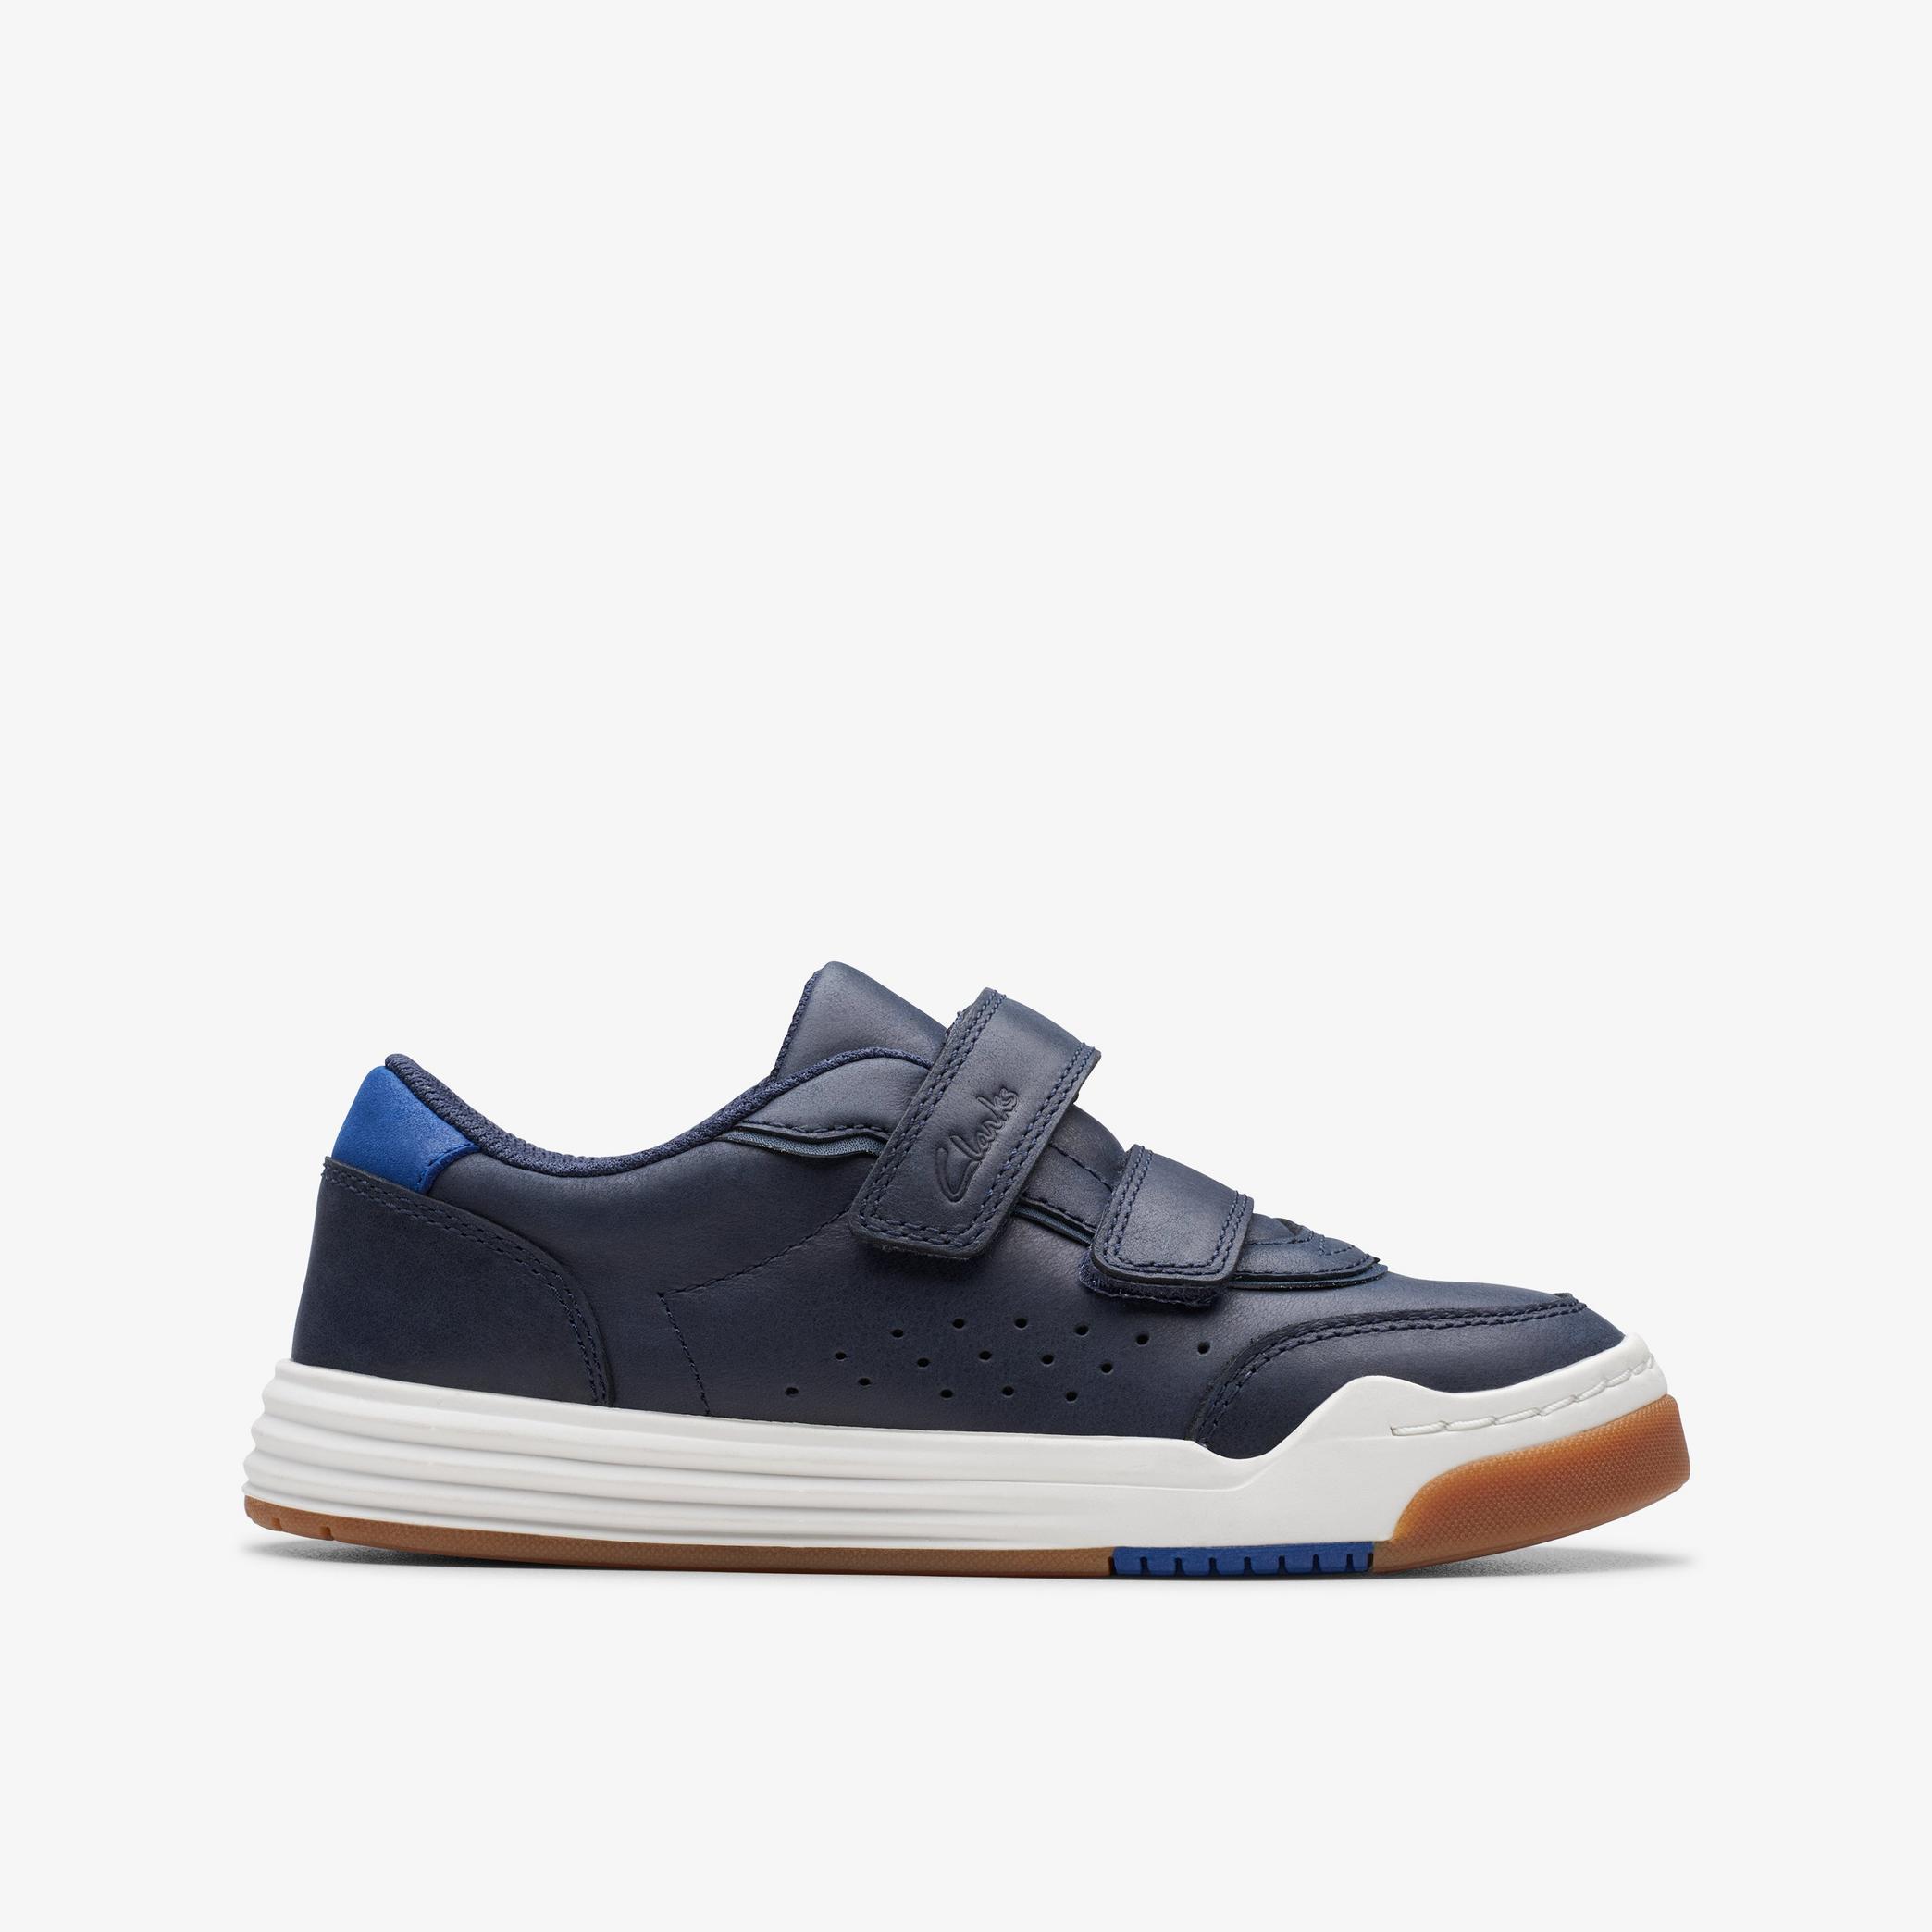 Urban Solo Kid Navy Trainers, view 1 of 6